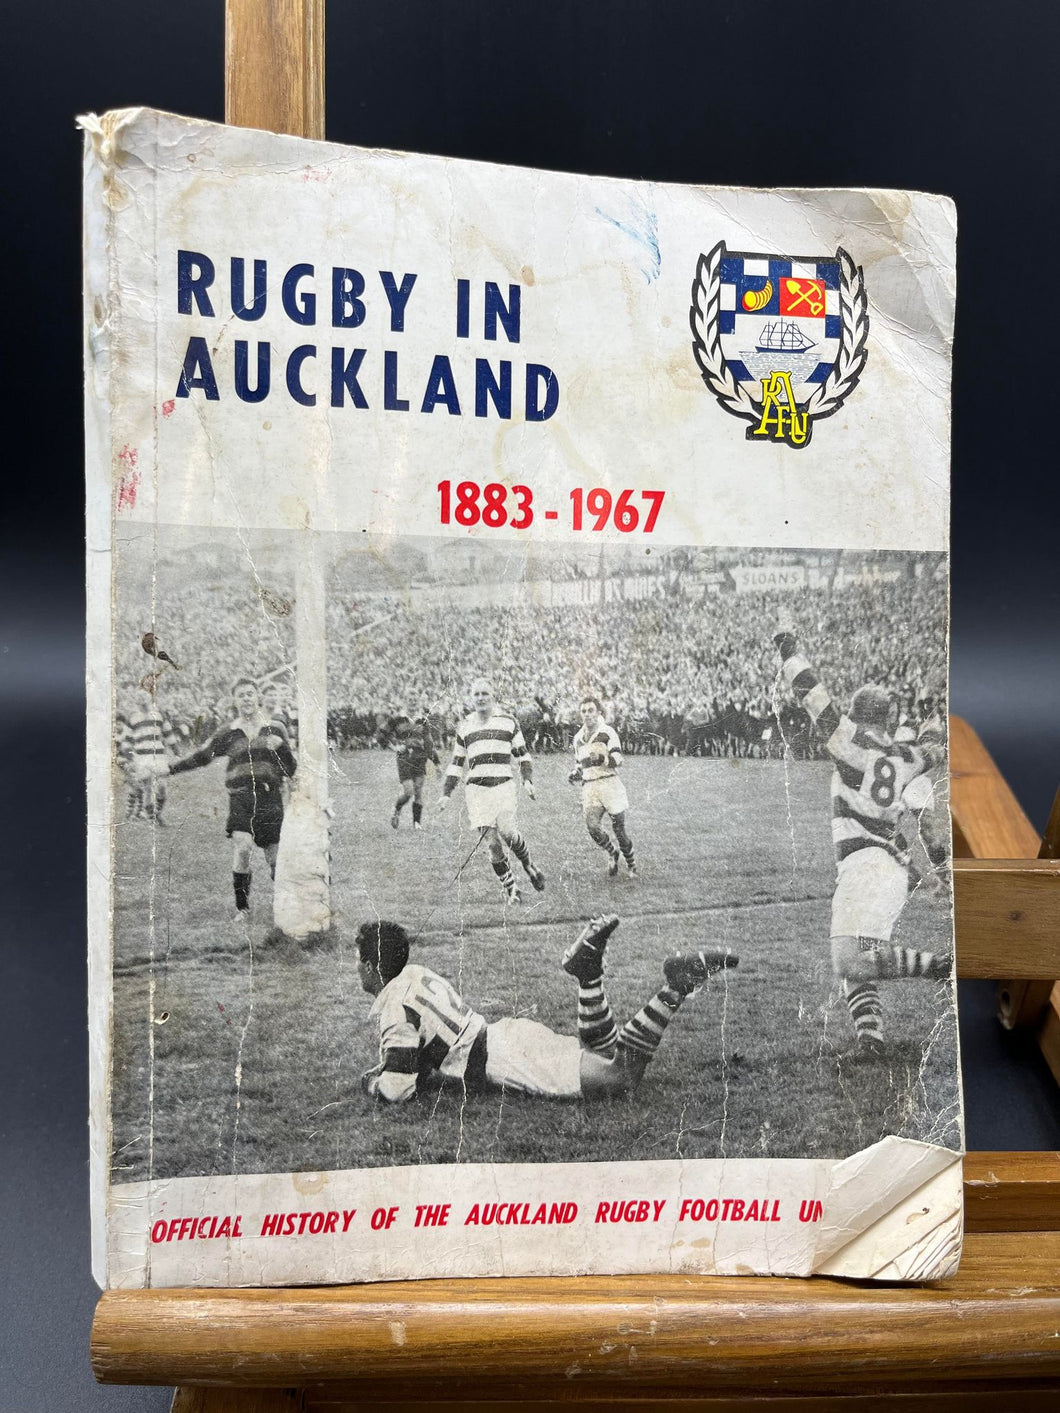 Vintage 1883-1967 Rugby in Auckland Book